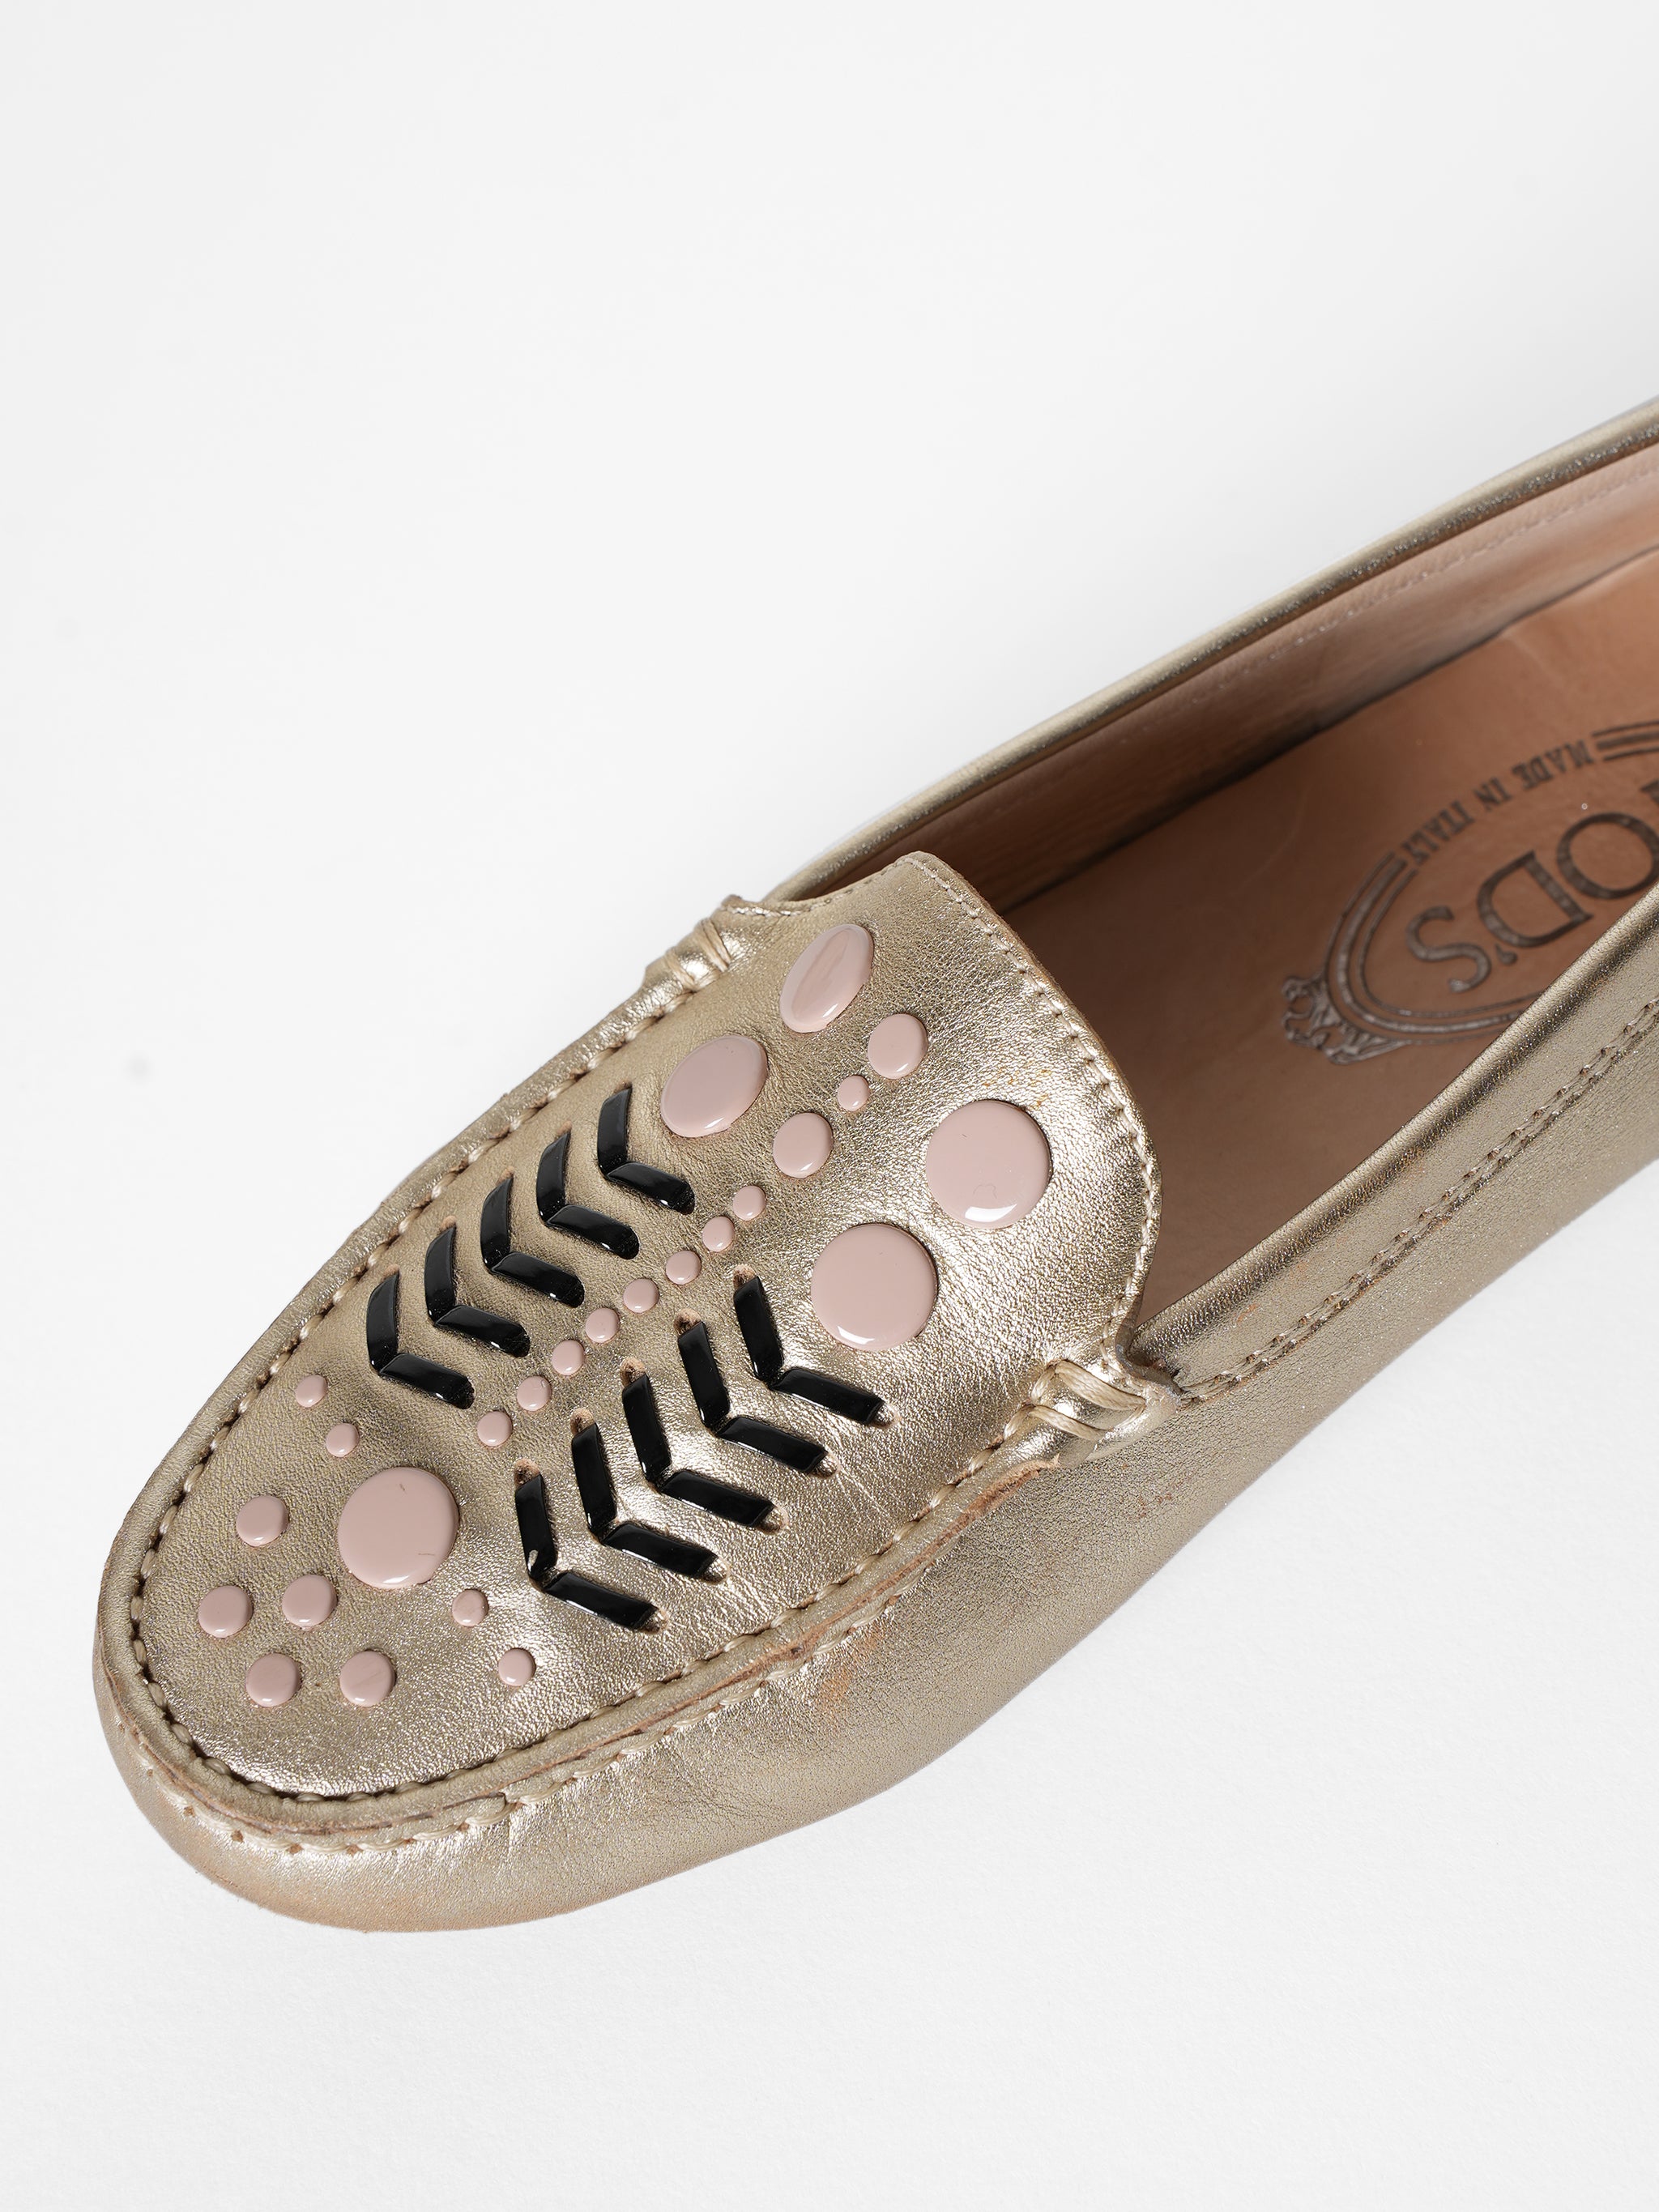 Tods Champagne Leather Moccasin